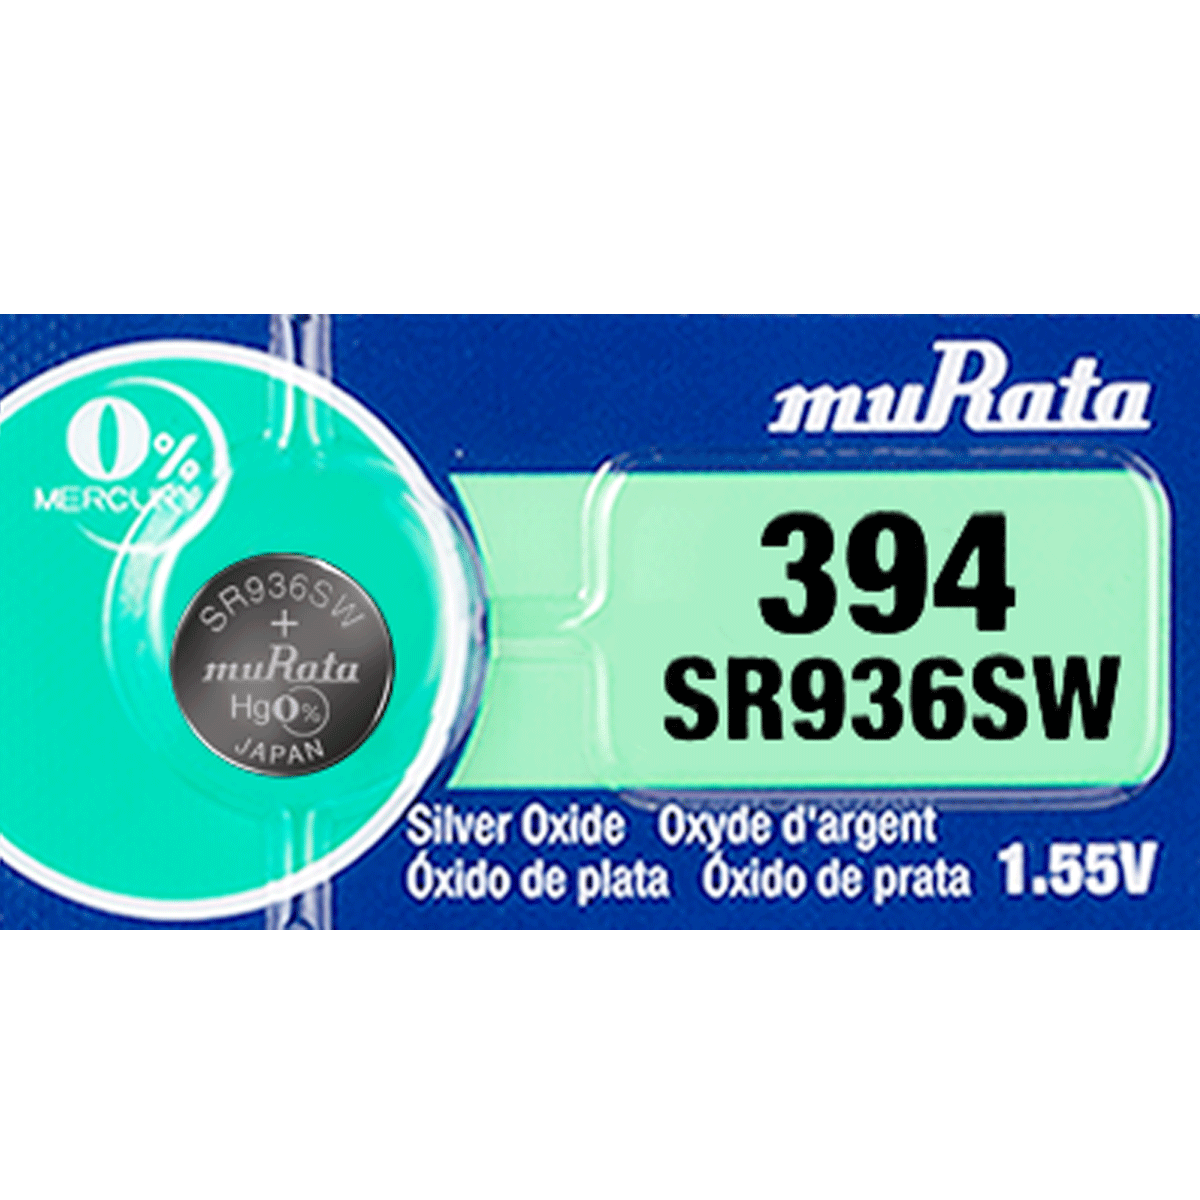 Murata CR2016 Battery 3V Lithium Coin Cell (1PC) (formerly SONY)